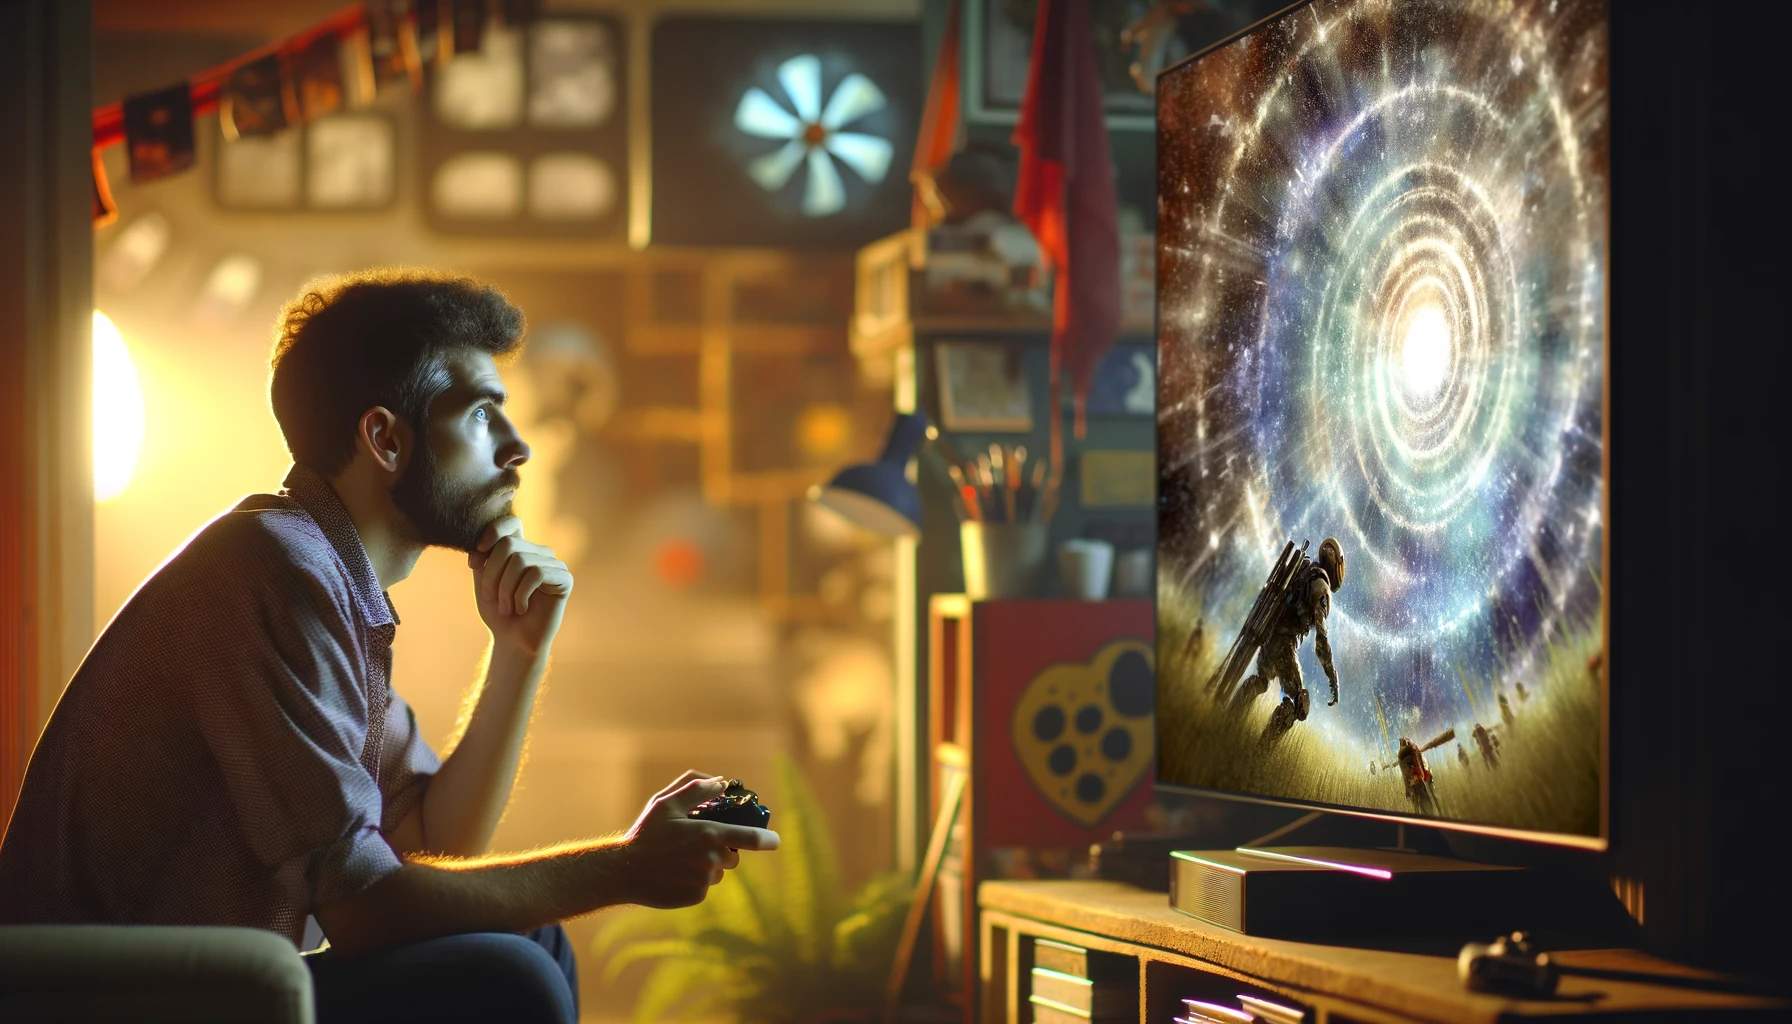 Introspection Video Games: Journey Through the Mind with These Reflective Gaming Experiences